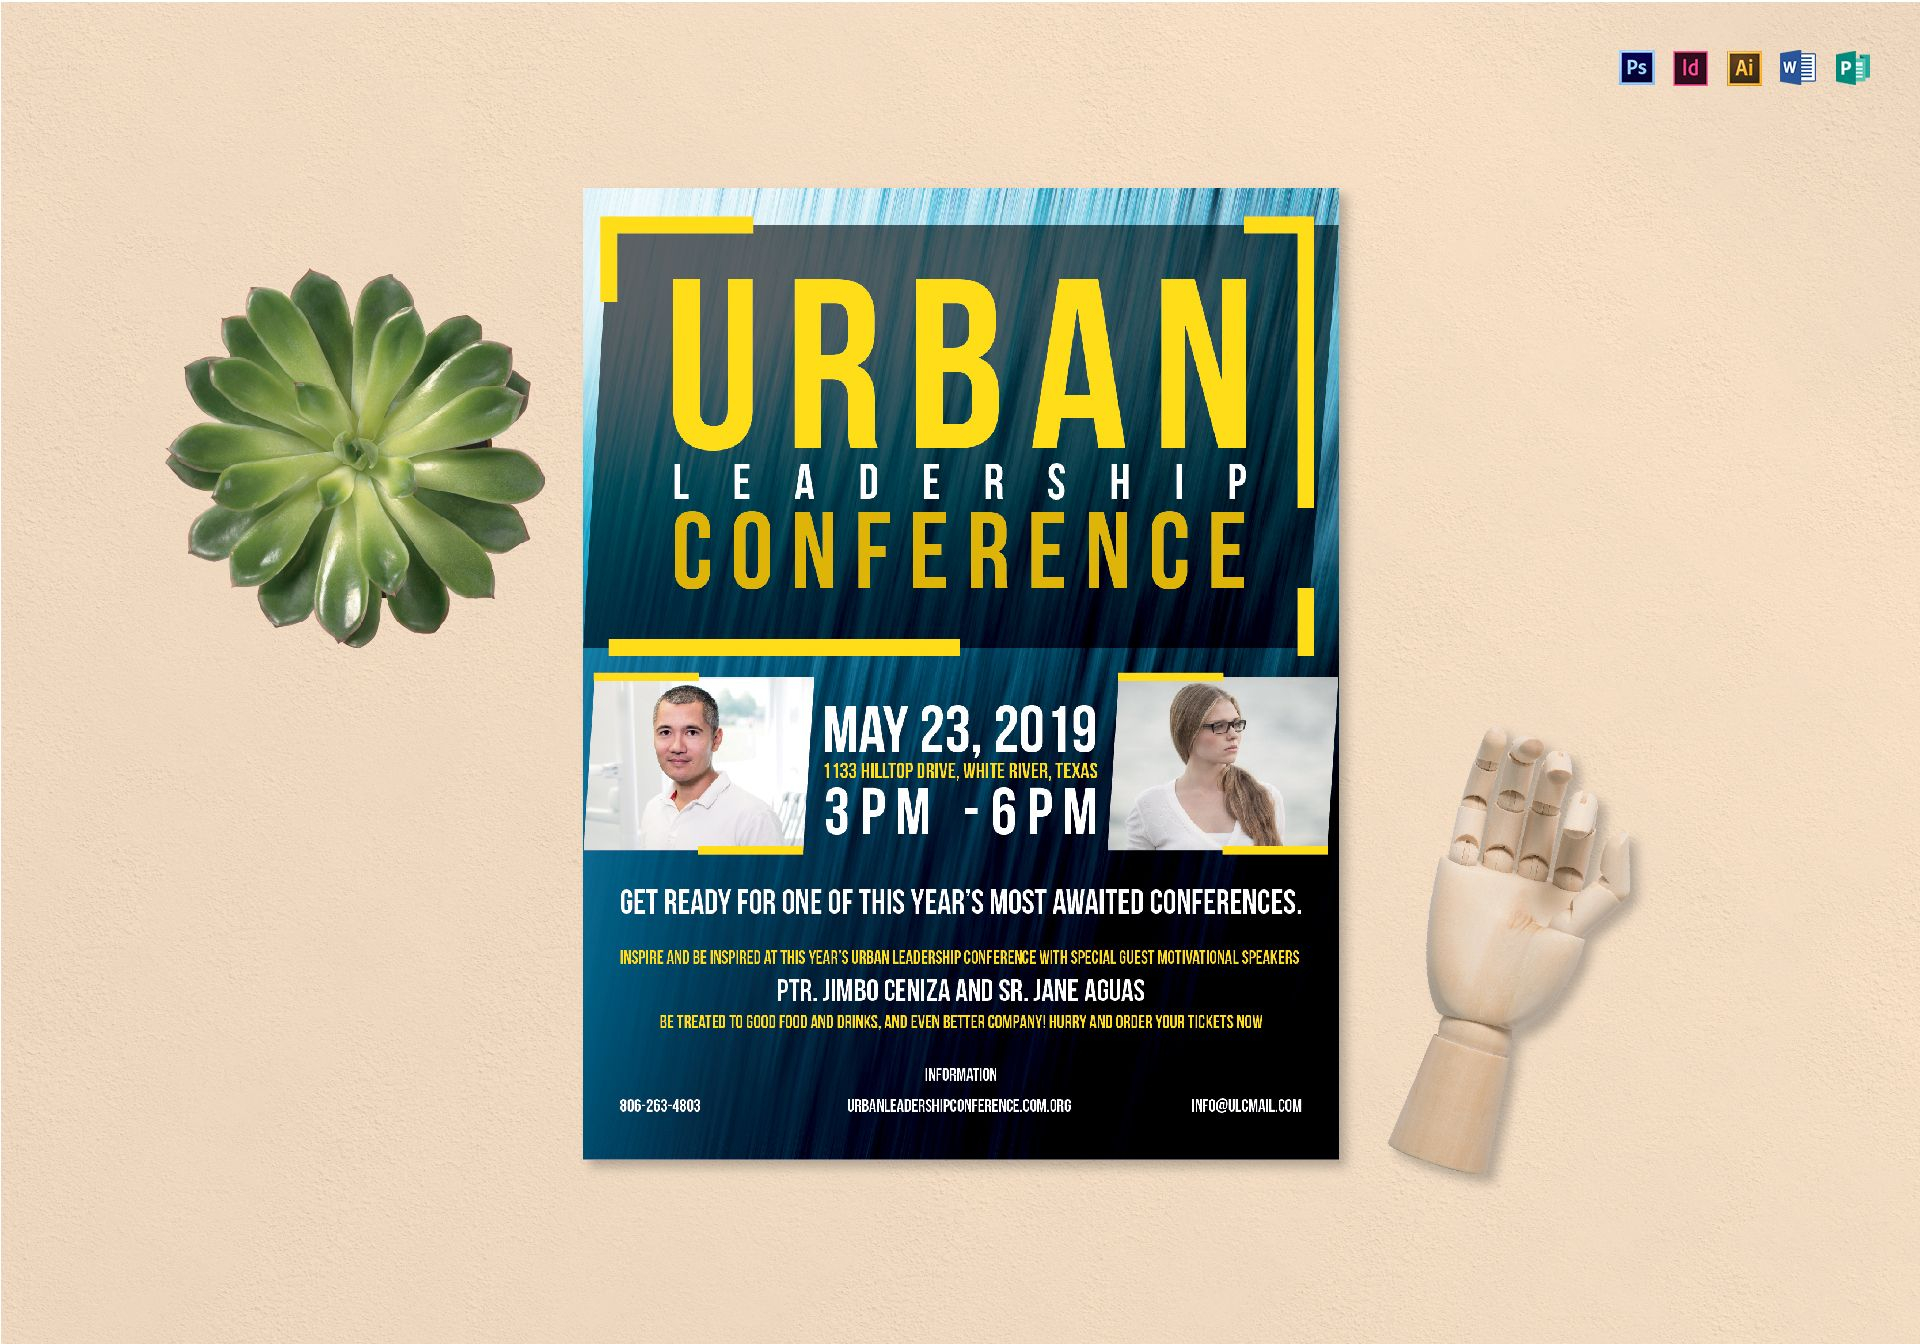 Urban Conference Flyer Template In Motivational Speaker Flyer Template Regarding Motivational Speaker Flyer Template